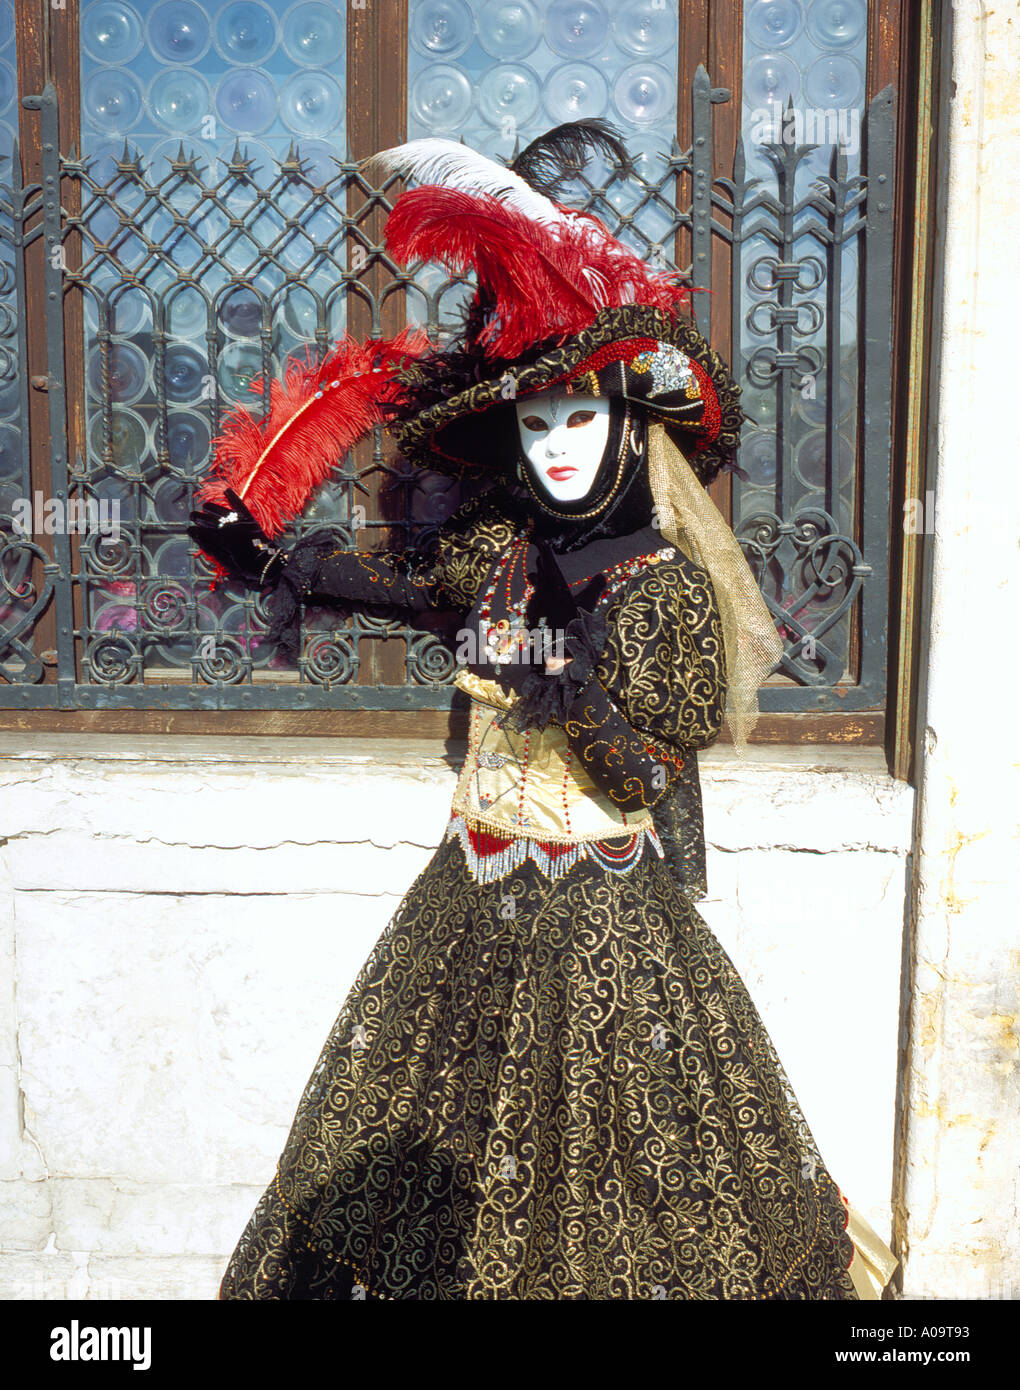 Carnival in Venice UNESCO World Heritage Site, Italy Europe. Photo by Willy Matheisl Stock Photo